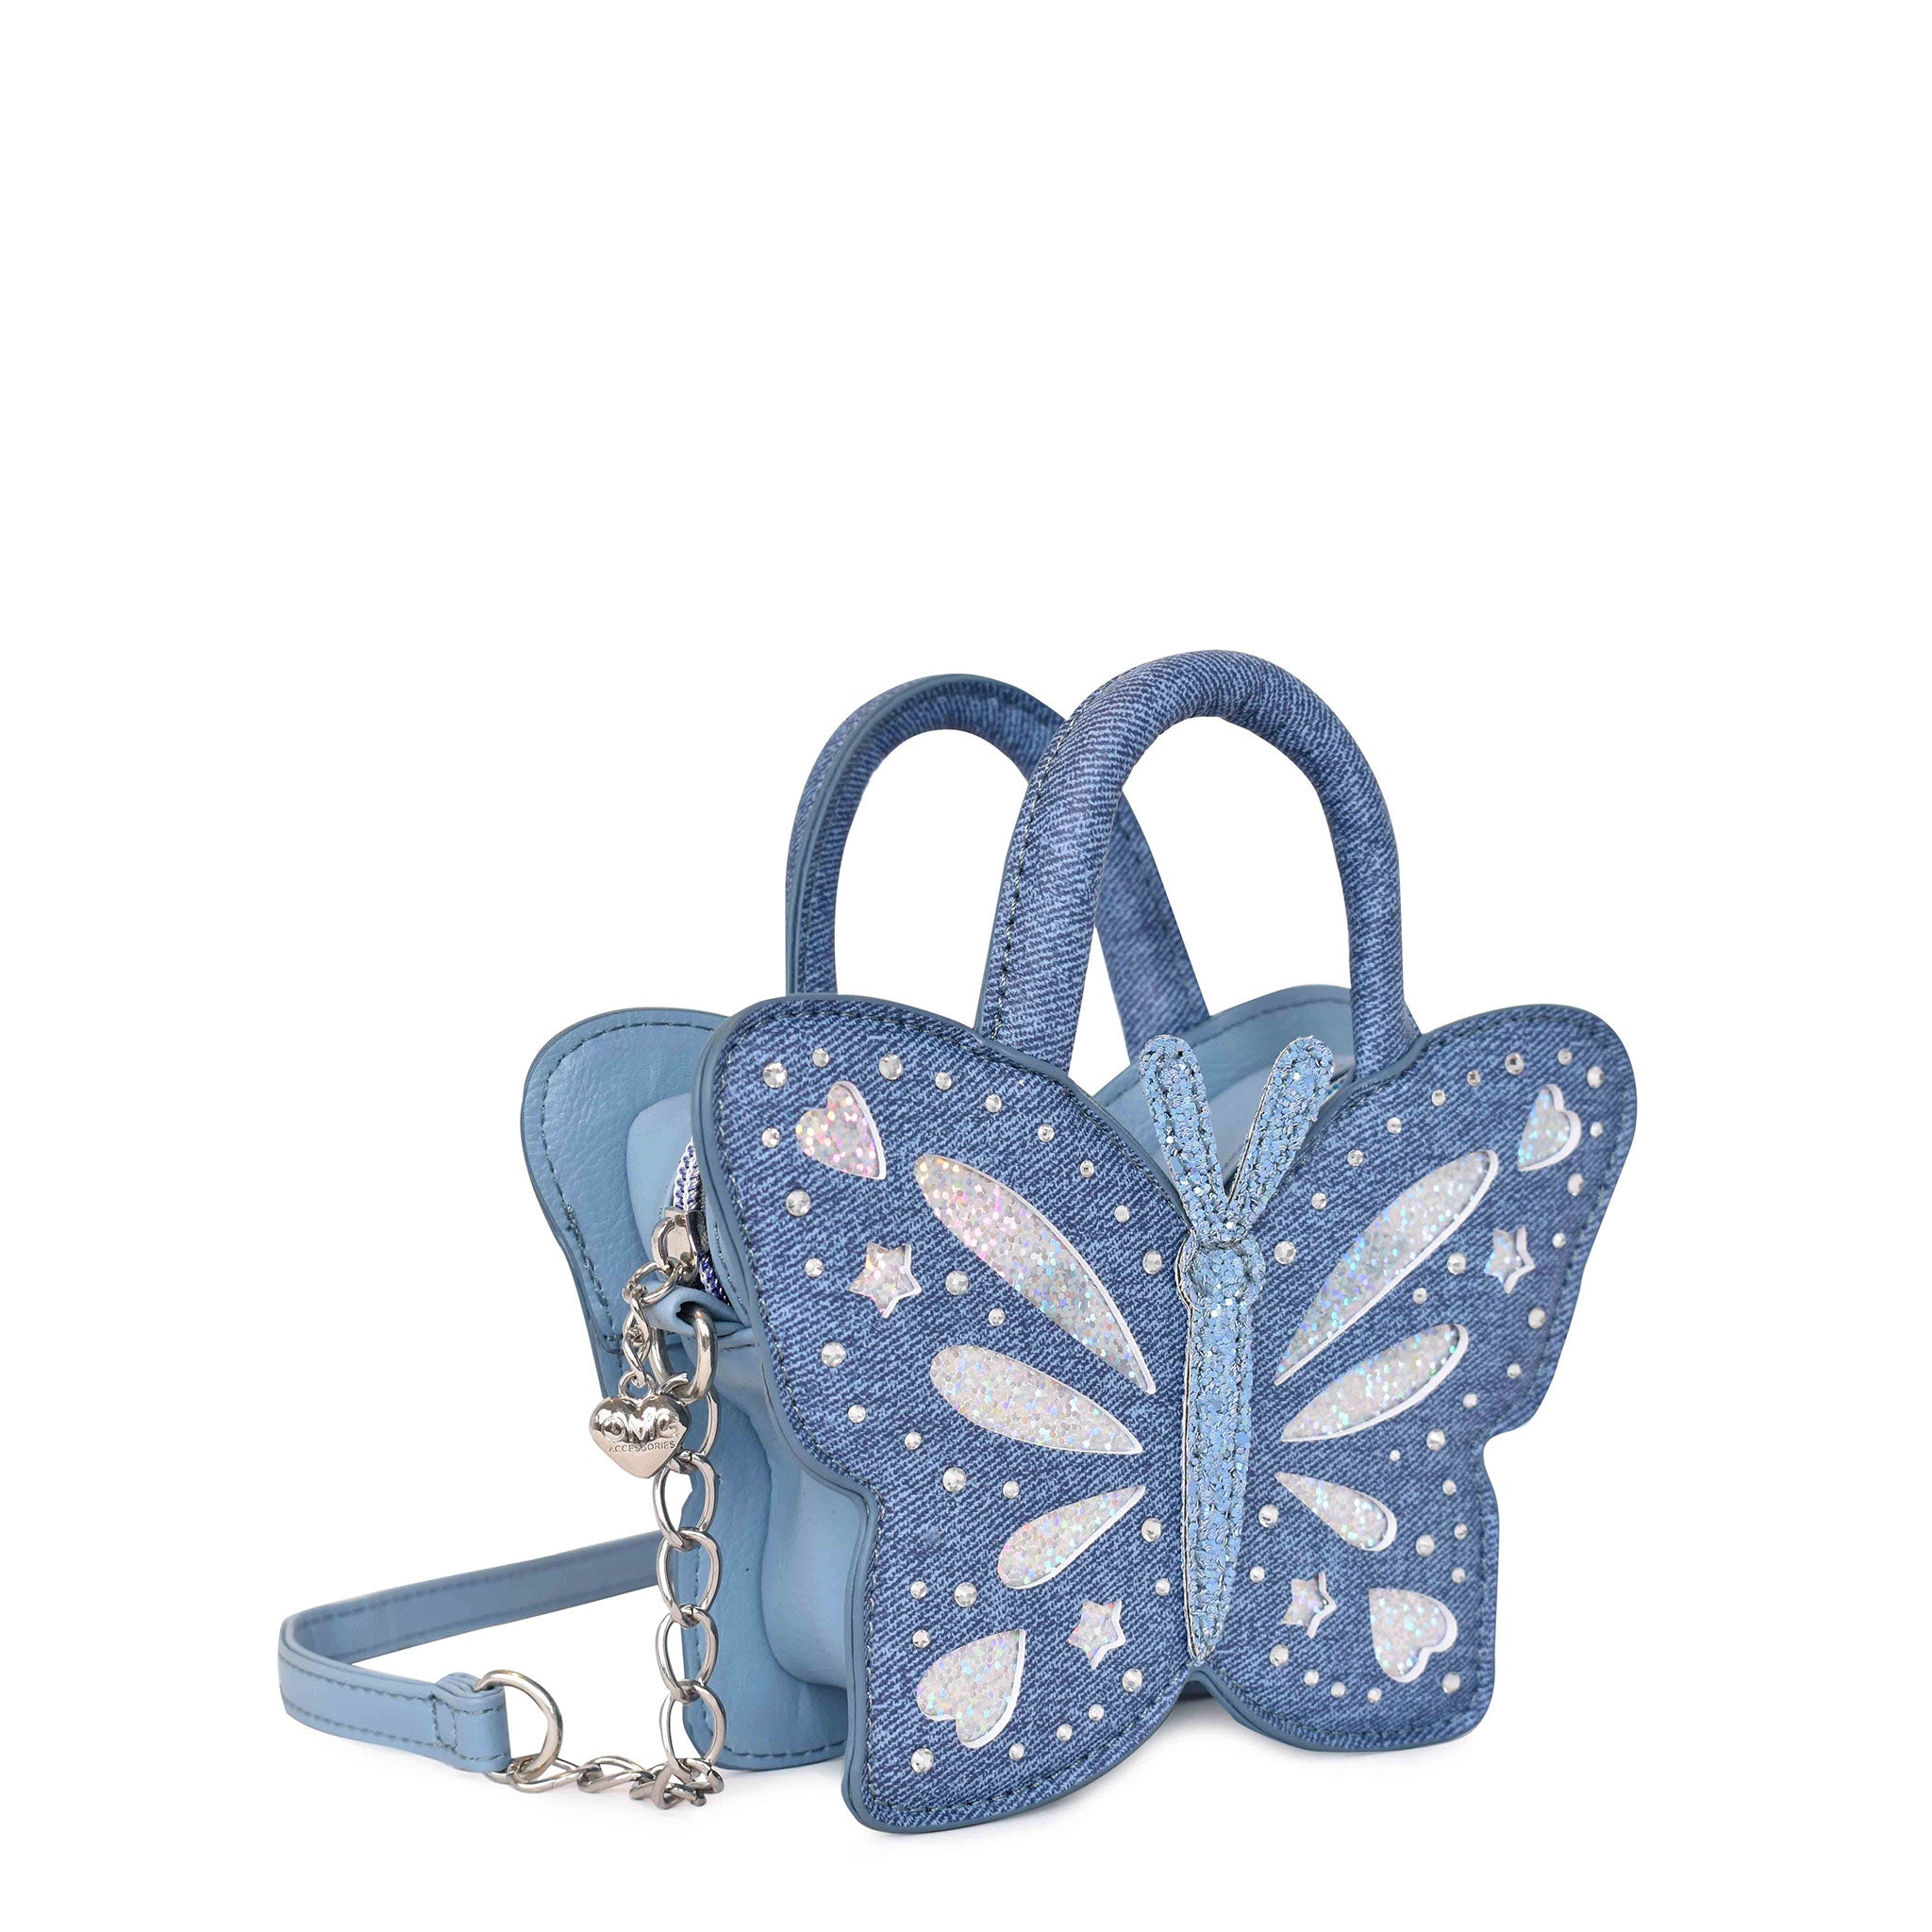 Side view of a denim butterfly shaped top handle crossbody bag with rhinsestones